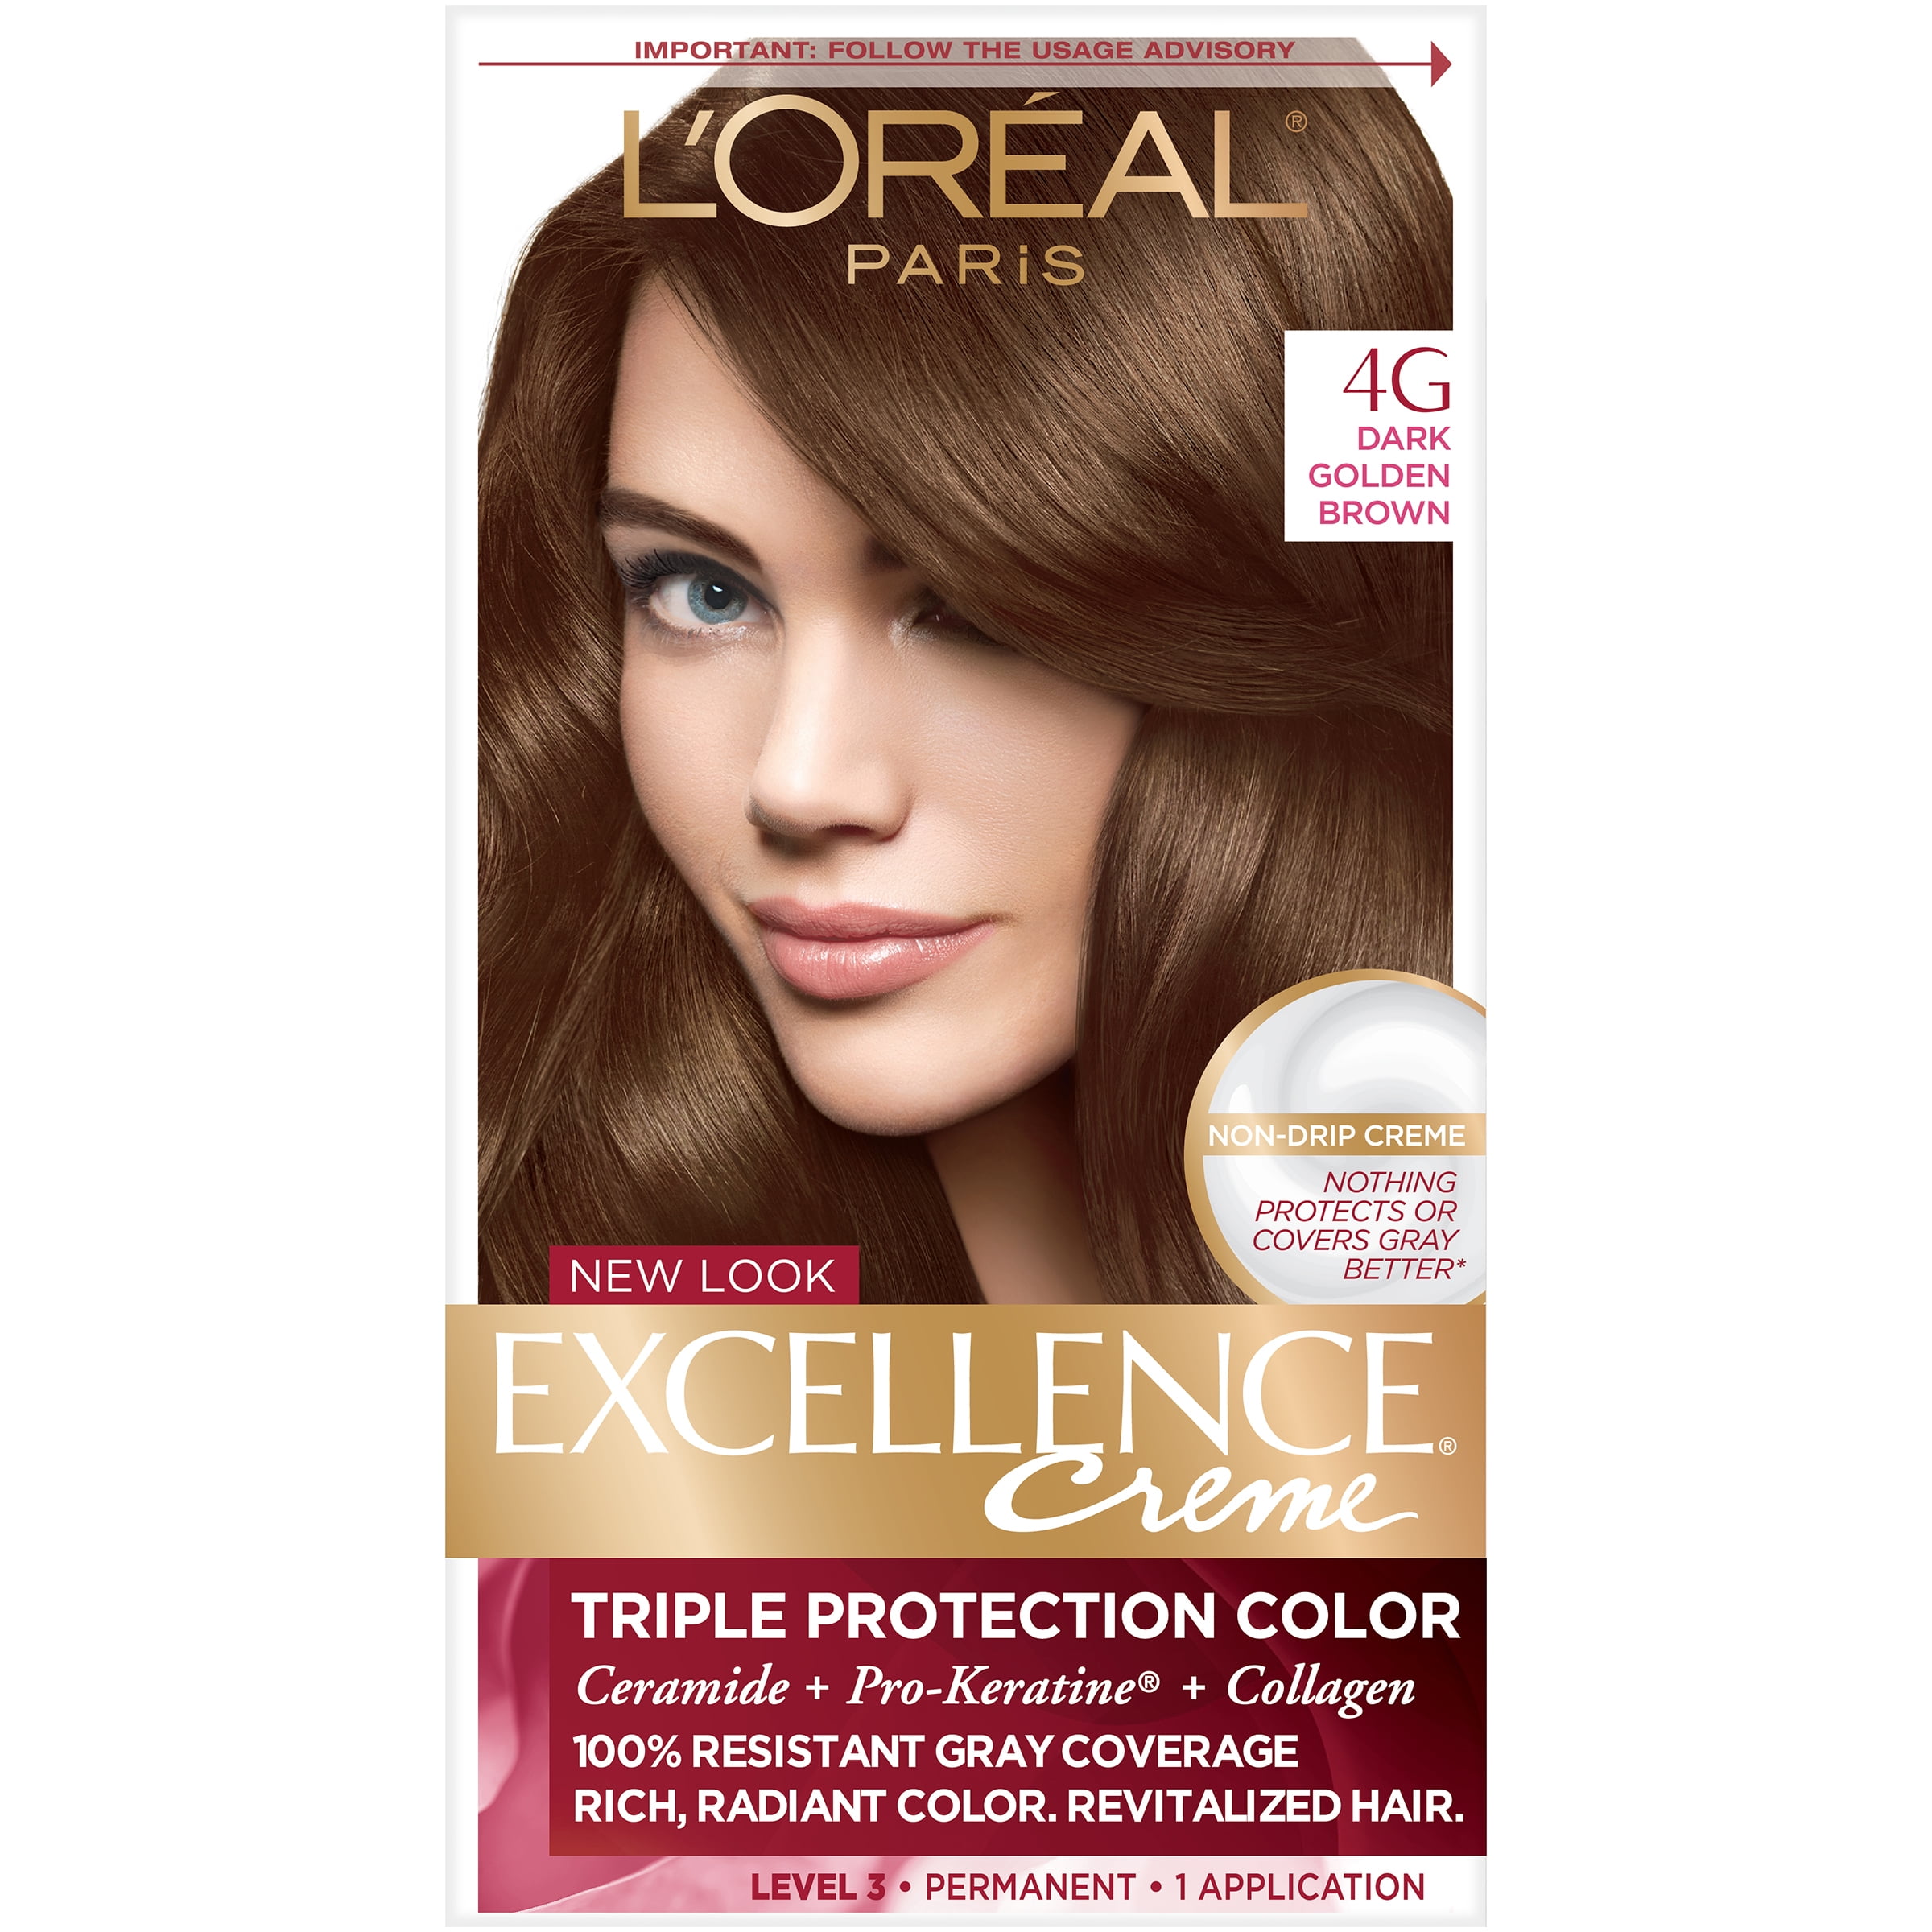 Buy L'Oreal Paris Excellence Creme Permanent Hair Color, 4G Dark Golden  Brown Online at Lowest Price in Ubuy Denmark. 10543993